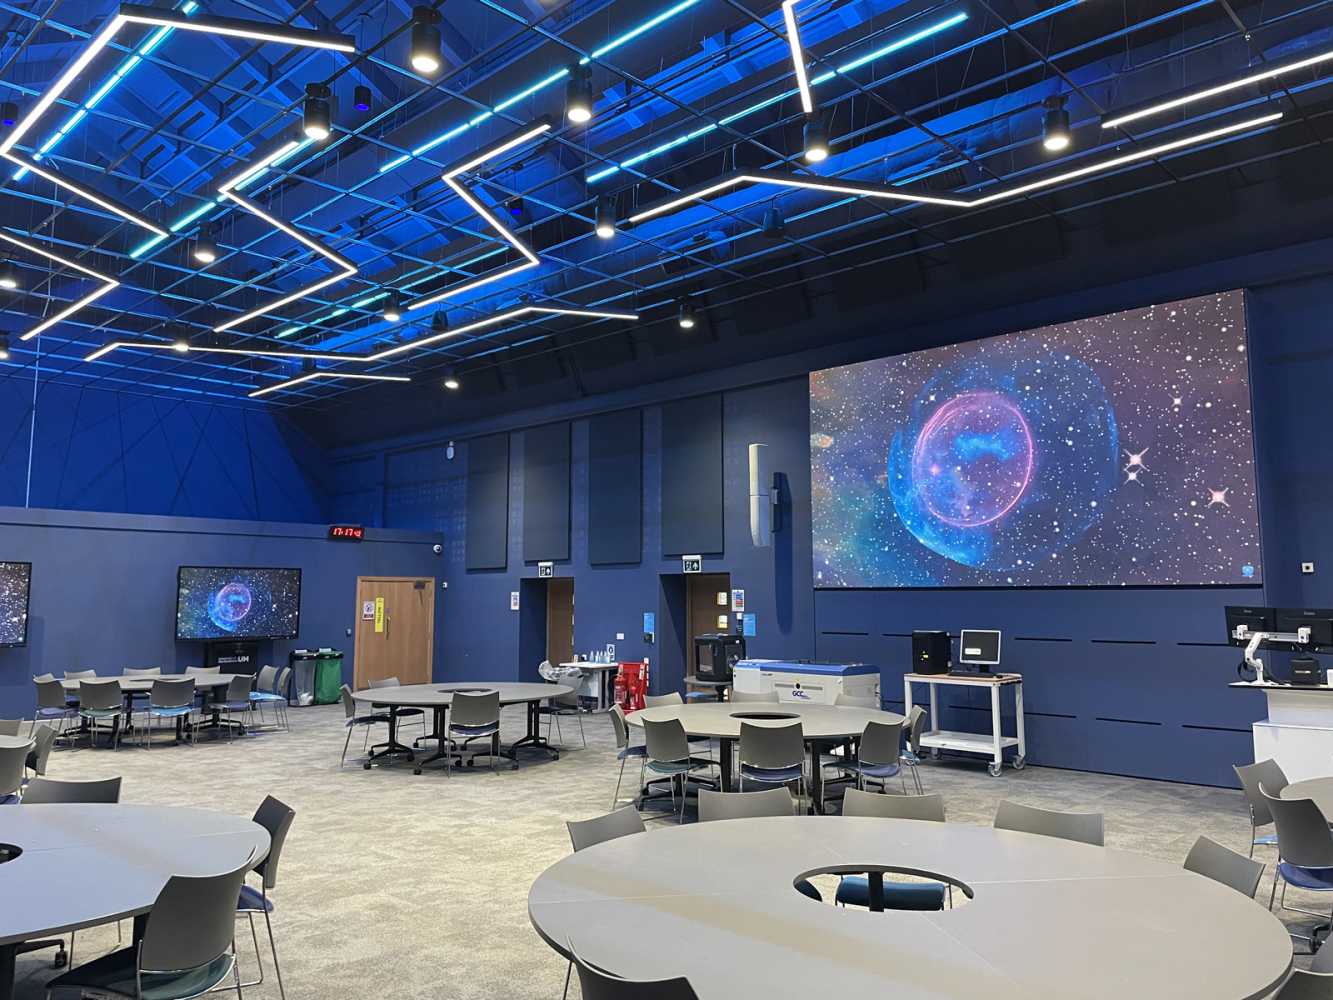 The new multi-use learning space